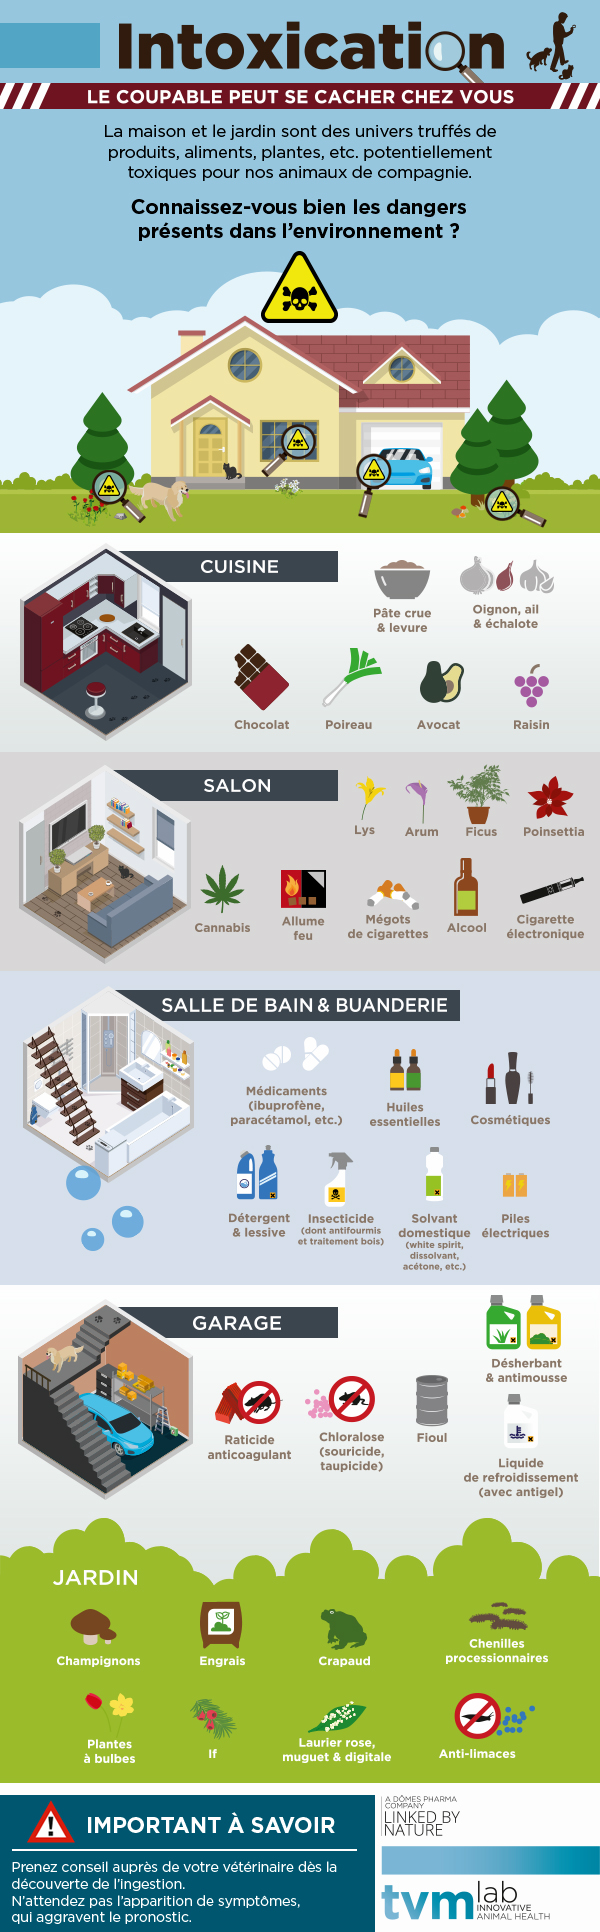 Infographie intoxication chien